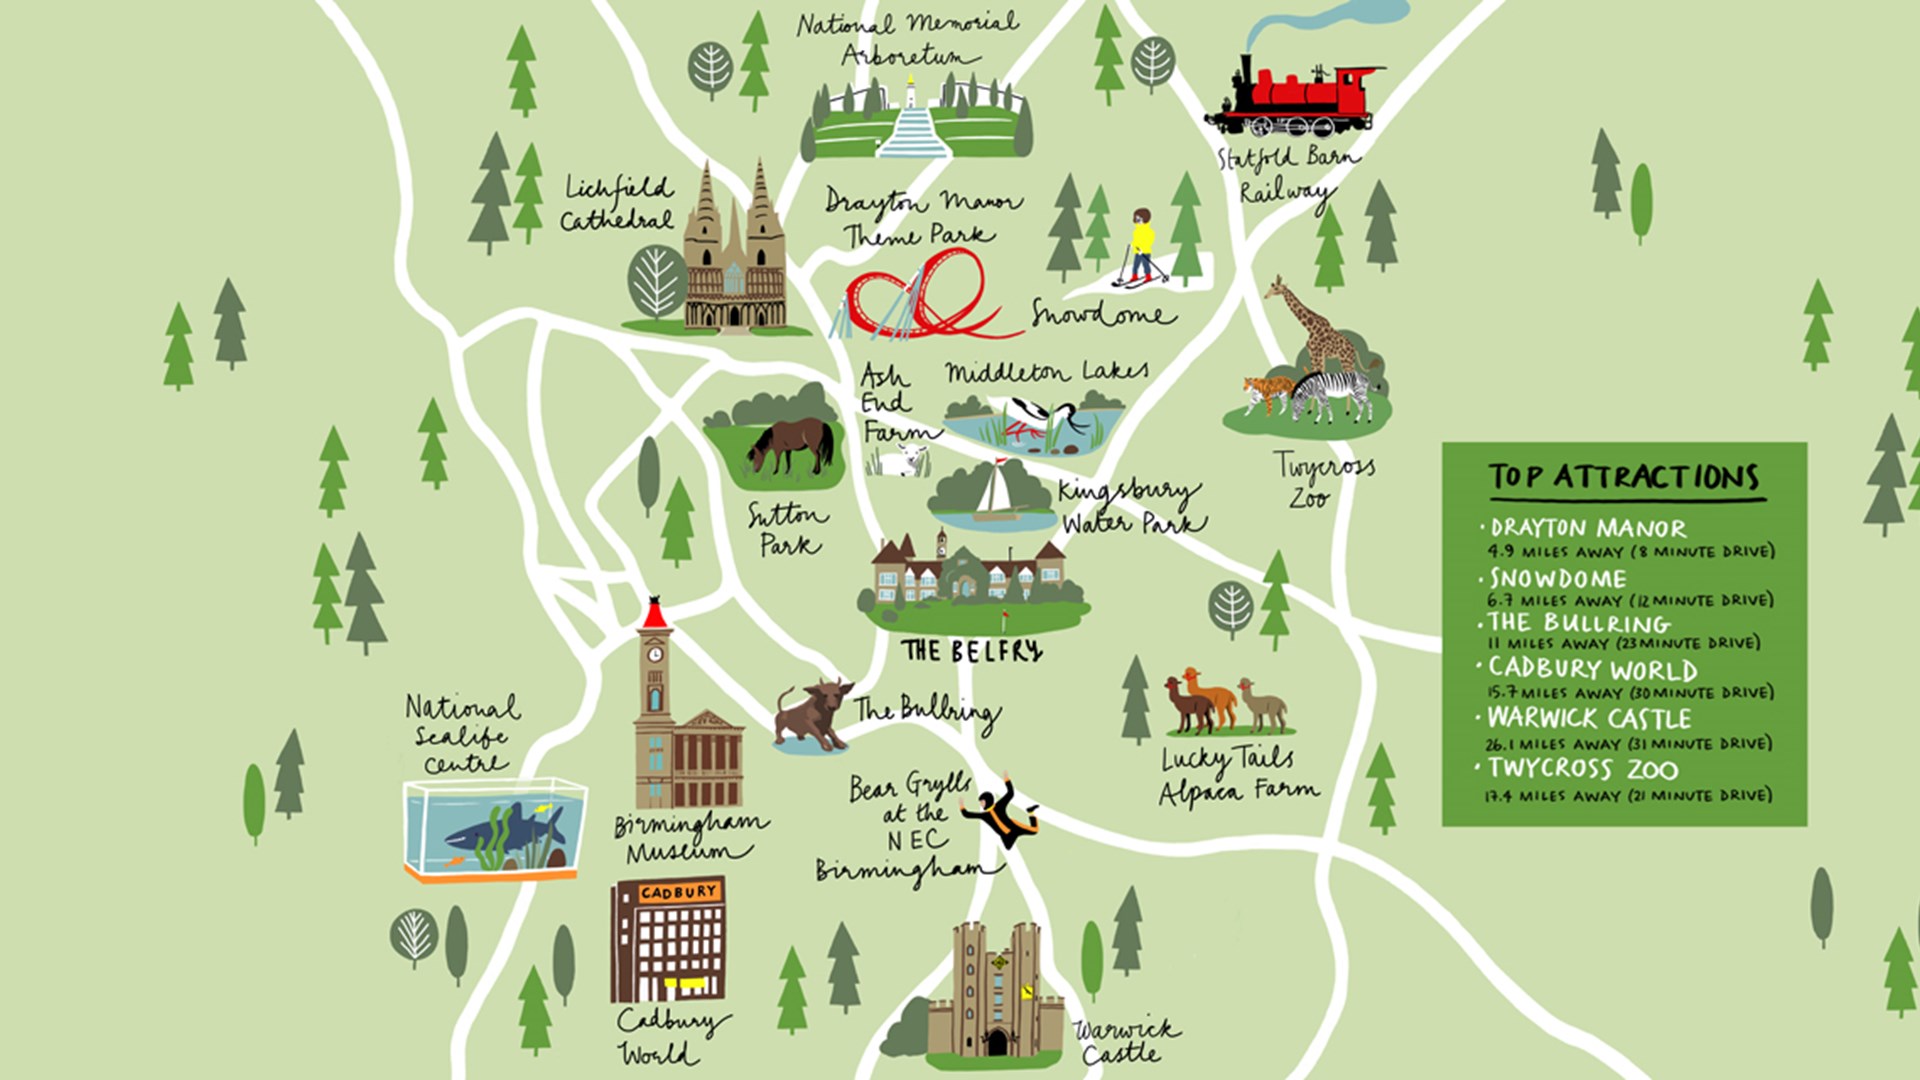 Map of top attractions near the Belfry, including Drayton Manor, Snowdome, The Bullring, Cadbury World, Warick Castle and Twycross Zoo